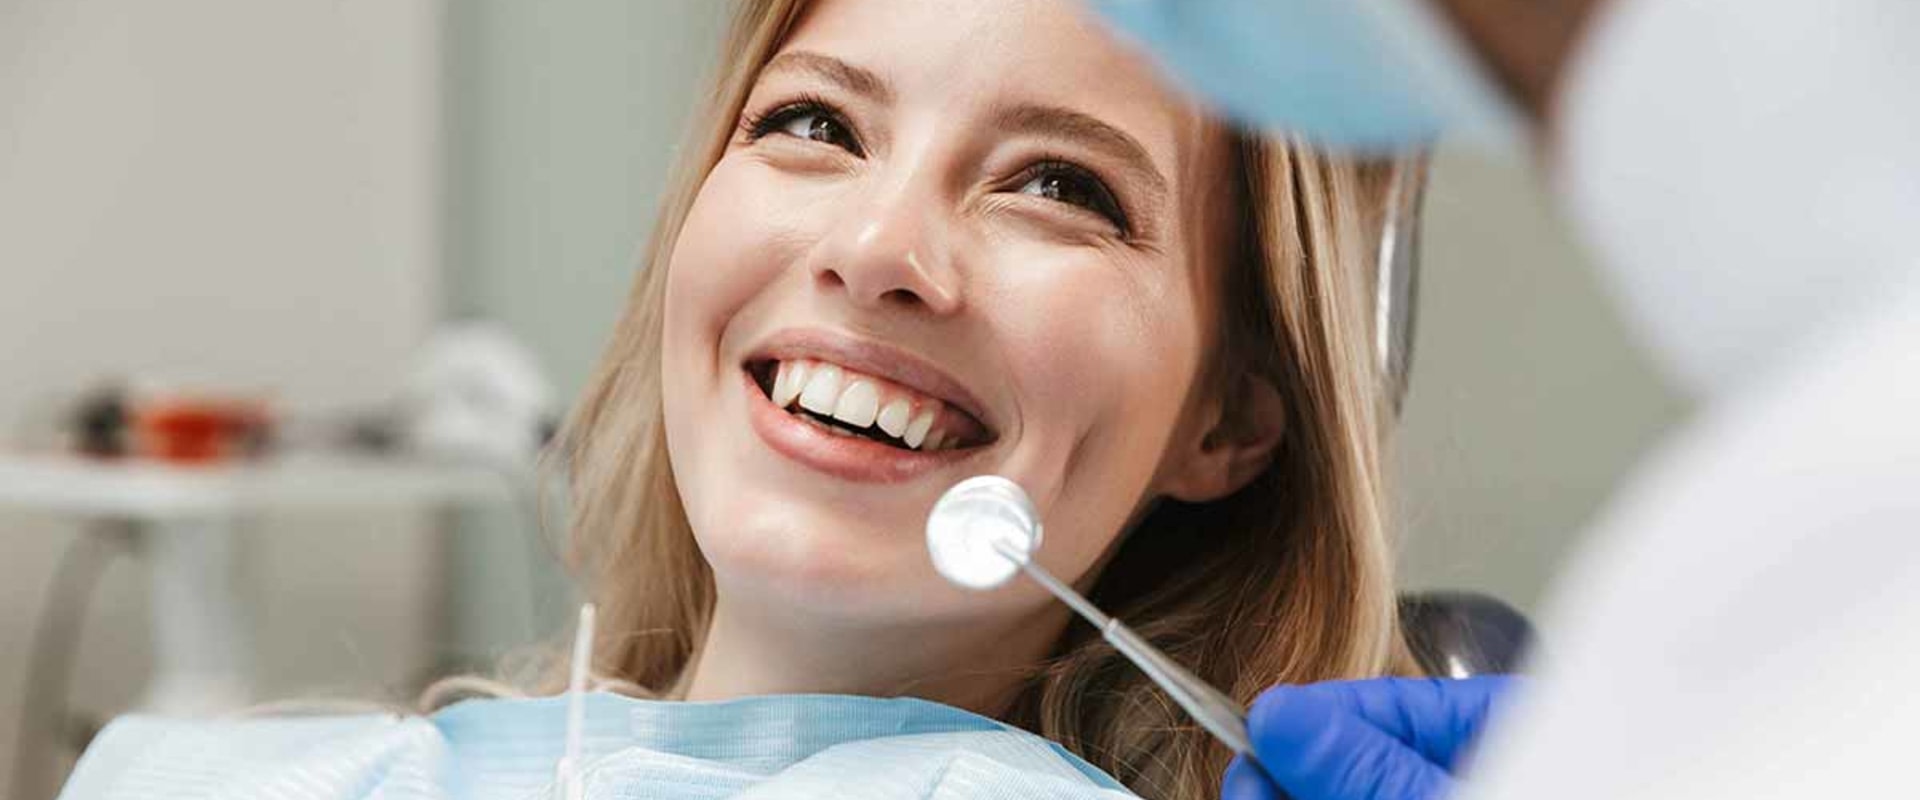 What Are The Key Factors To Consider When Choosing A Dentist In Austin For Preventive Health Care